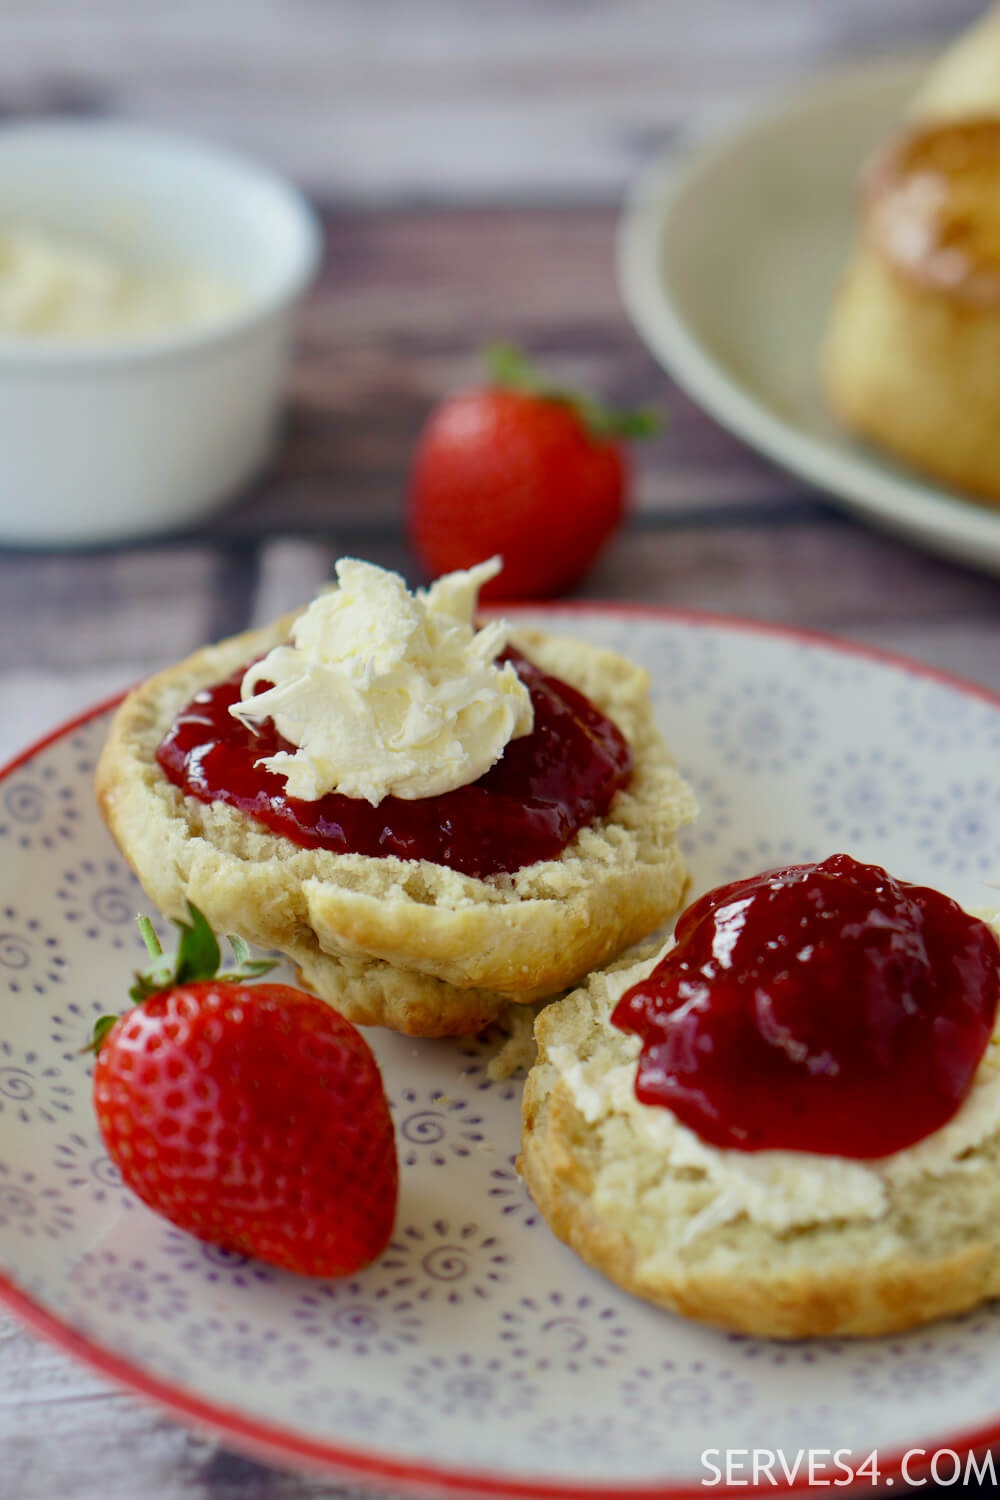 Scones with clotted cream and strawberry jam